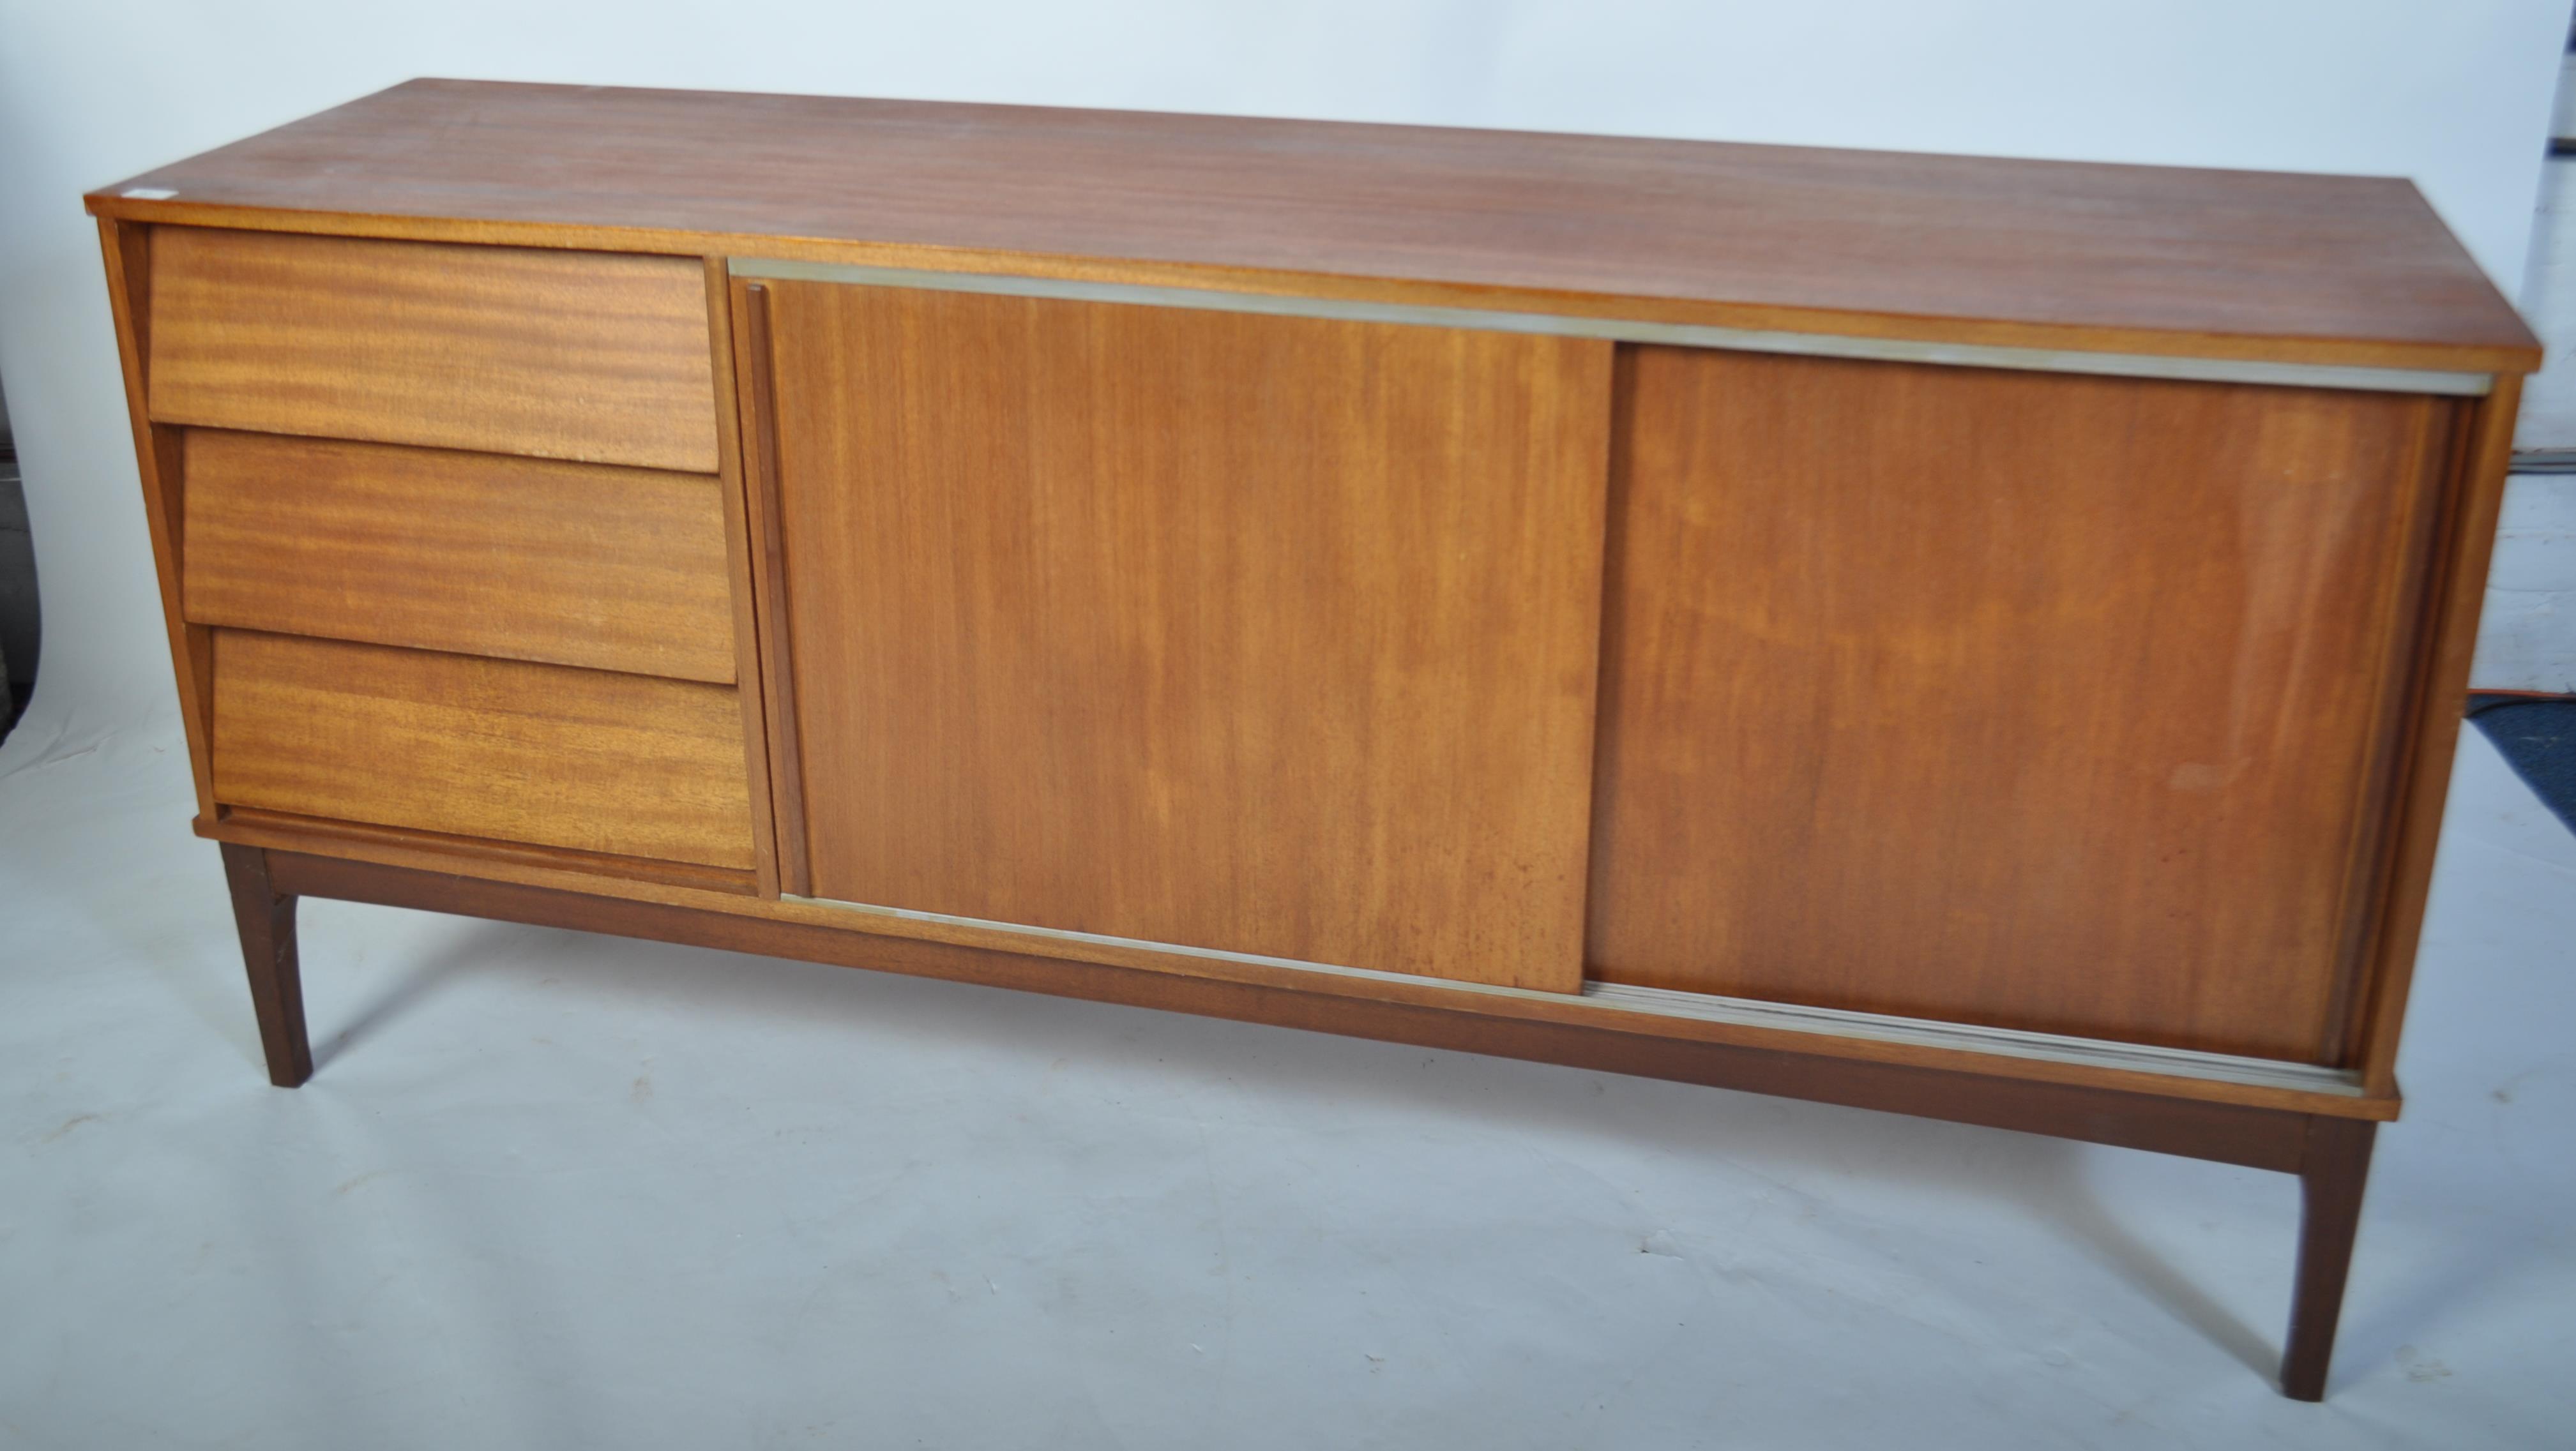 A retro mid century teak wood sideboard having a beehive angular facia comprising a series of - Image 2 of 5